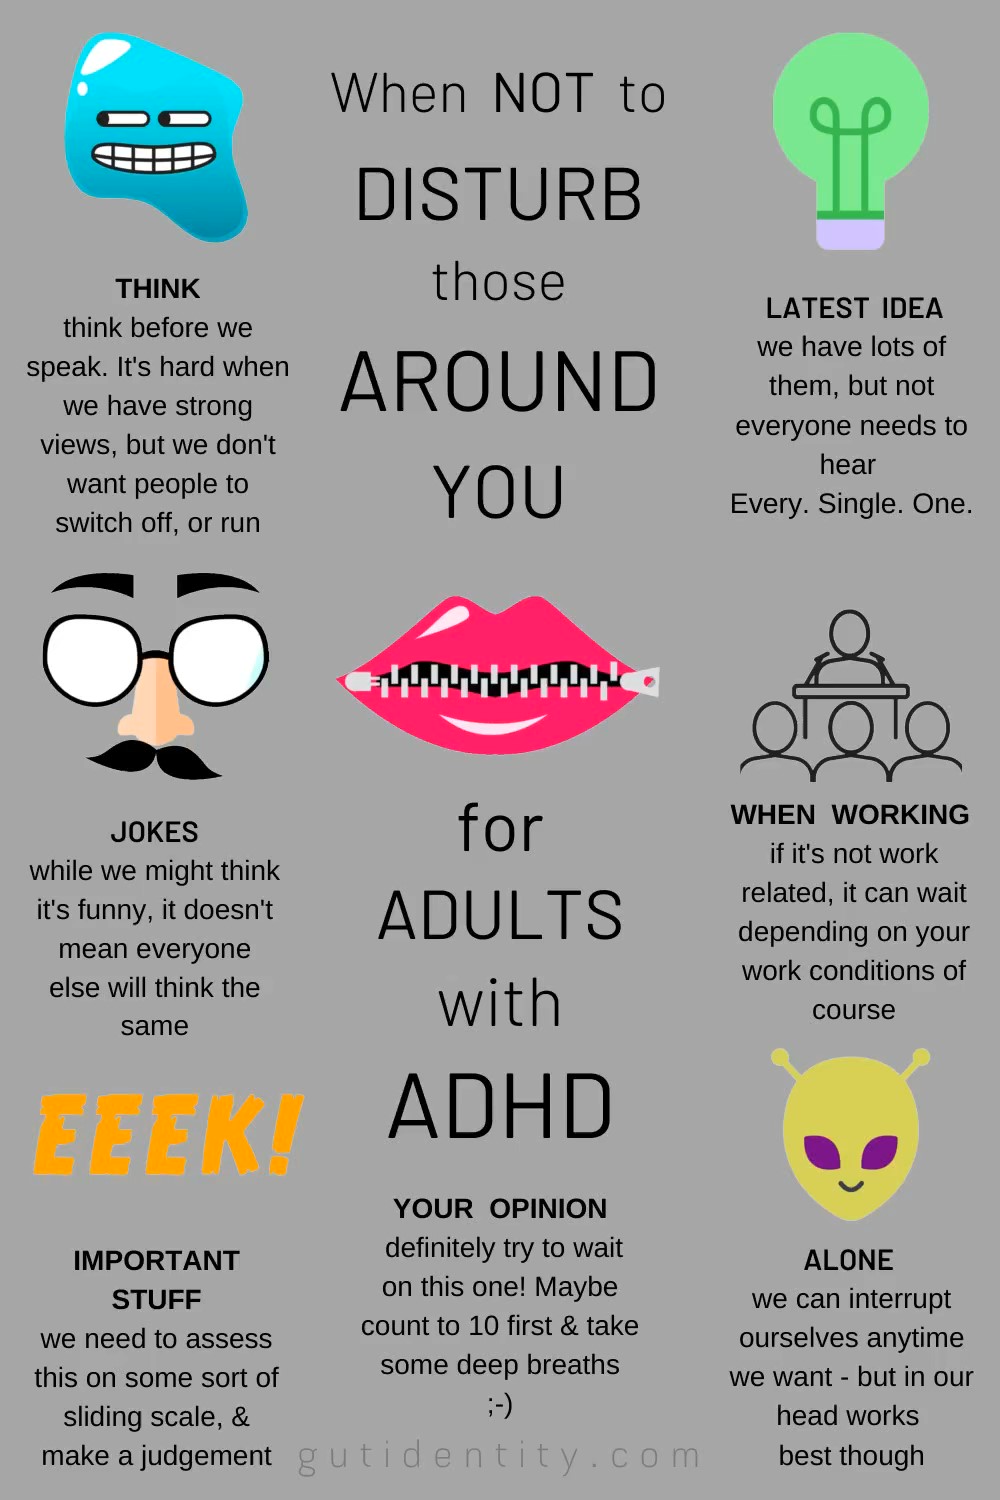 strategies-for-adults-with-adhd-gutidentity